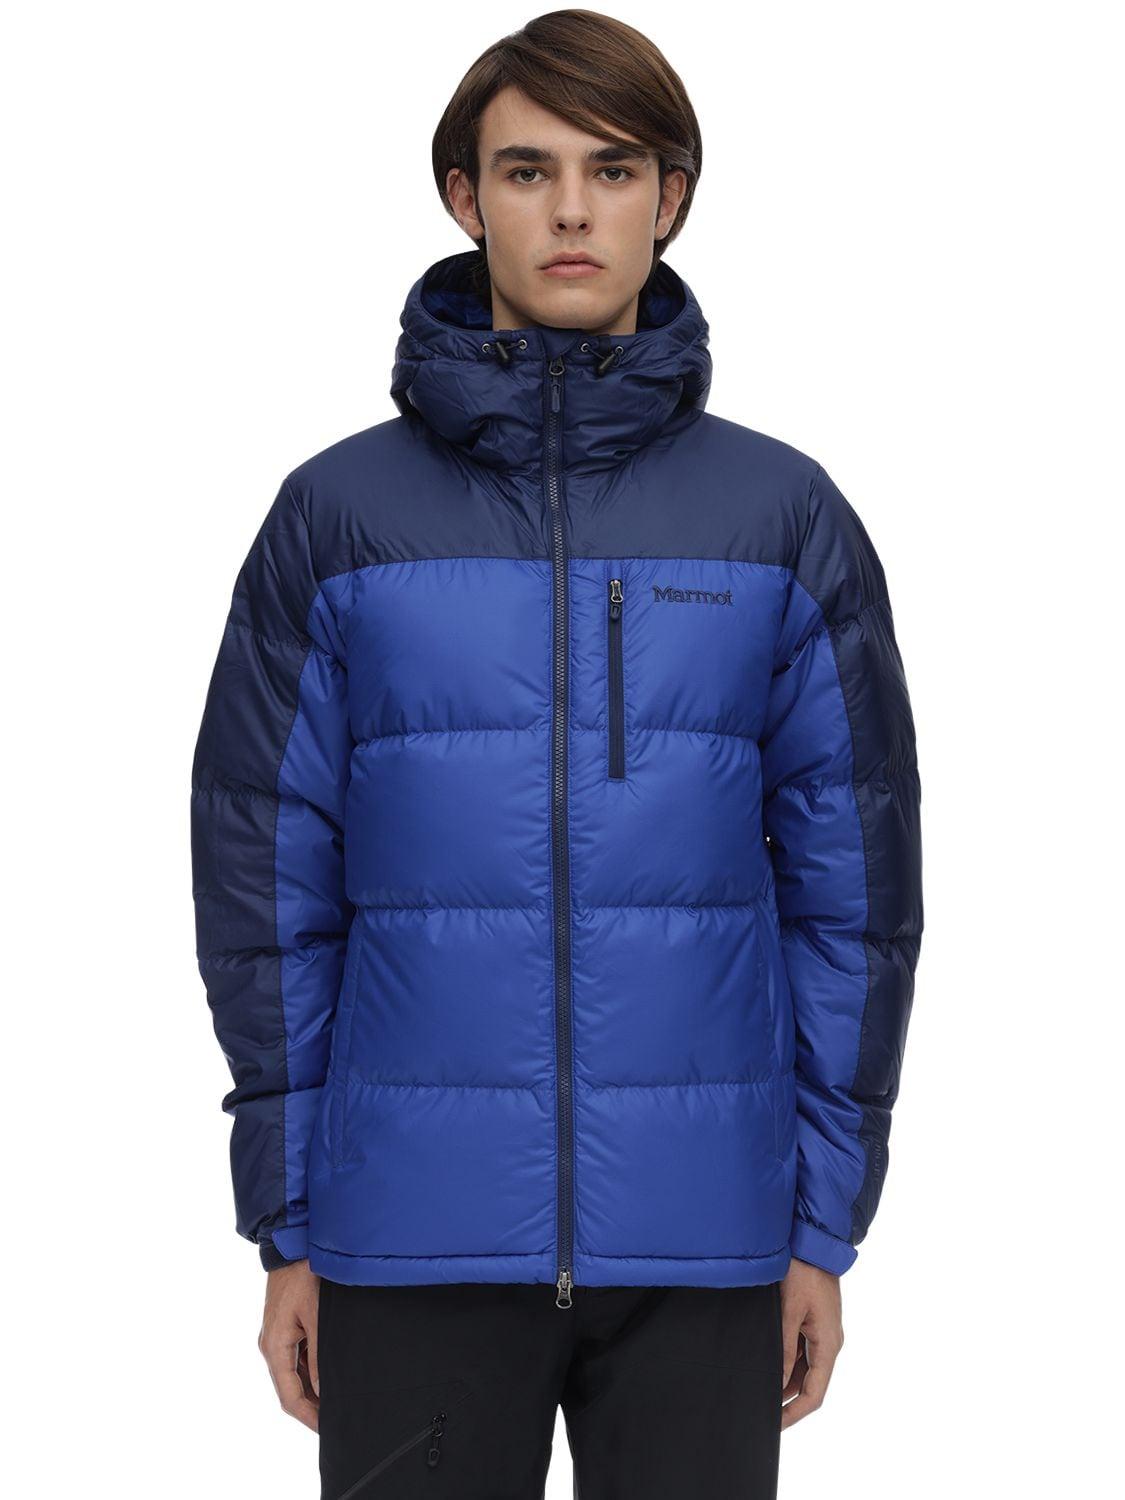 Marmot Guides Hooded Down Jacket in Blue for Men - Lyst